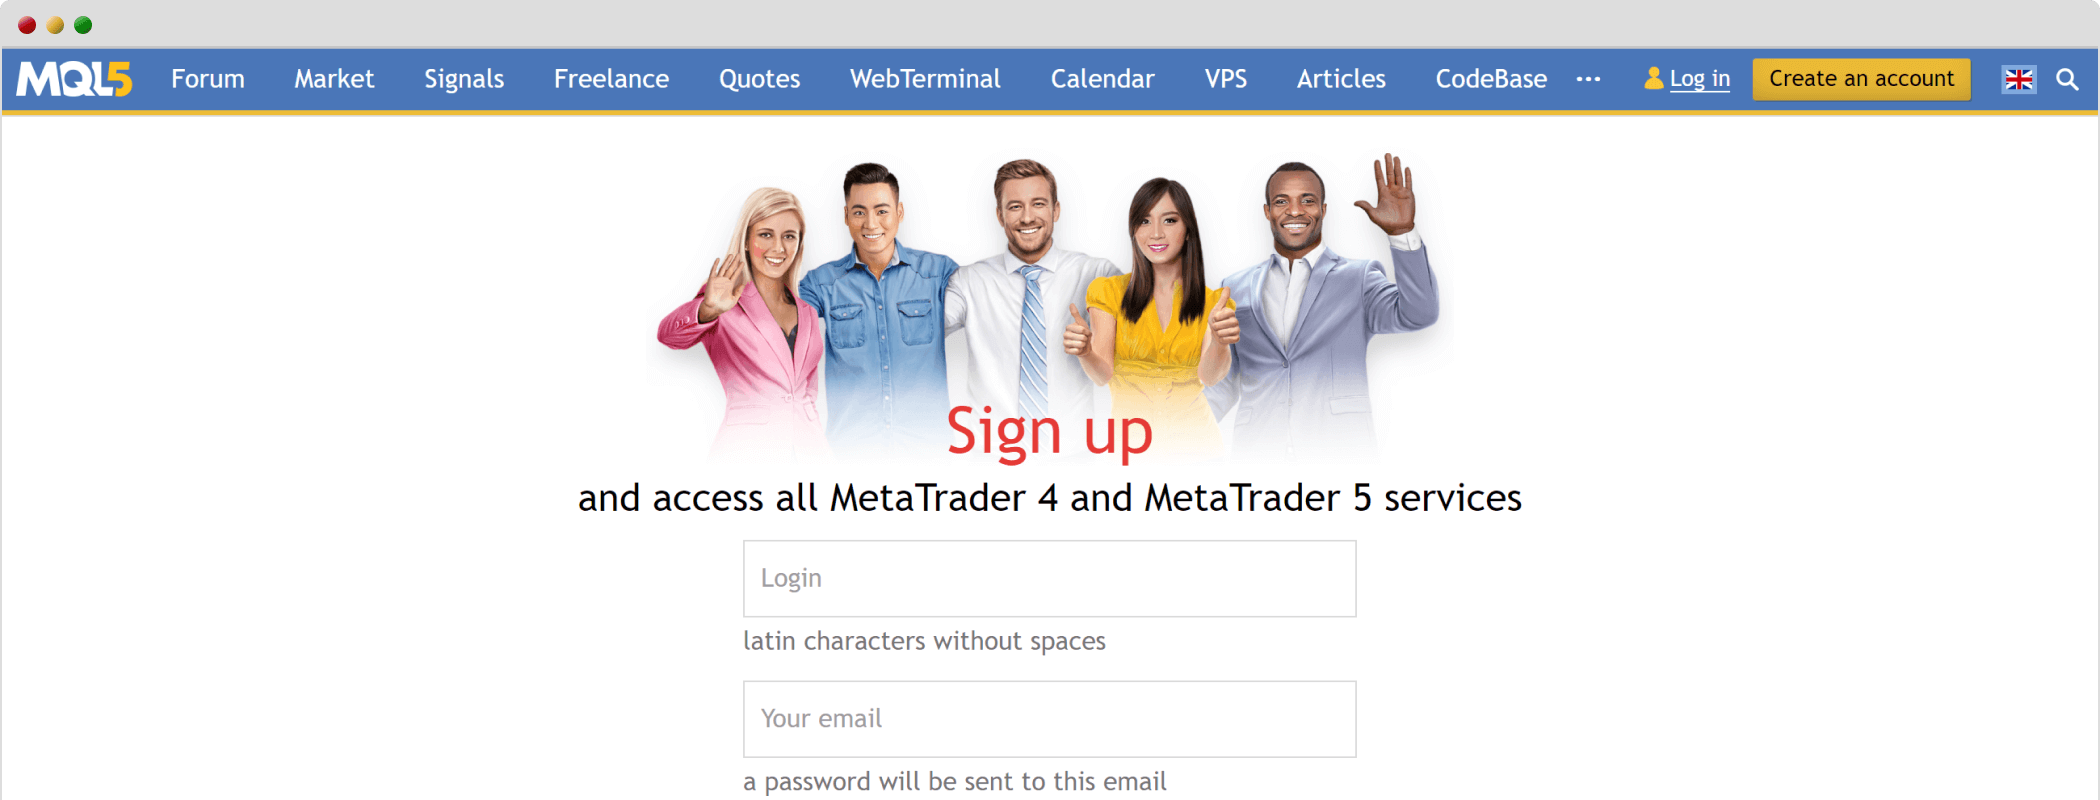 MQL5 website appears during installation